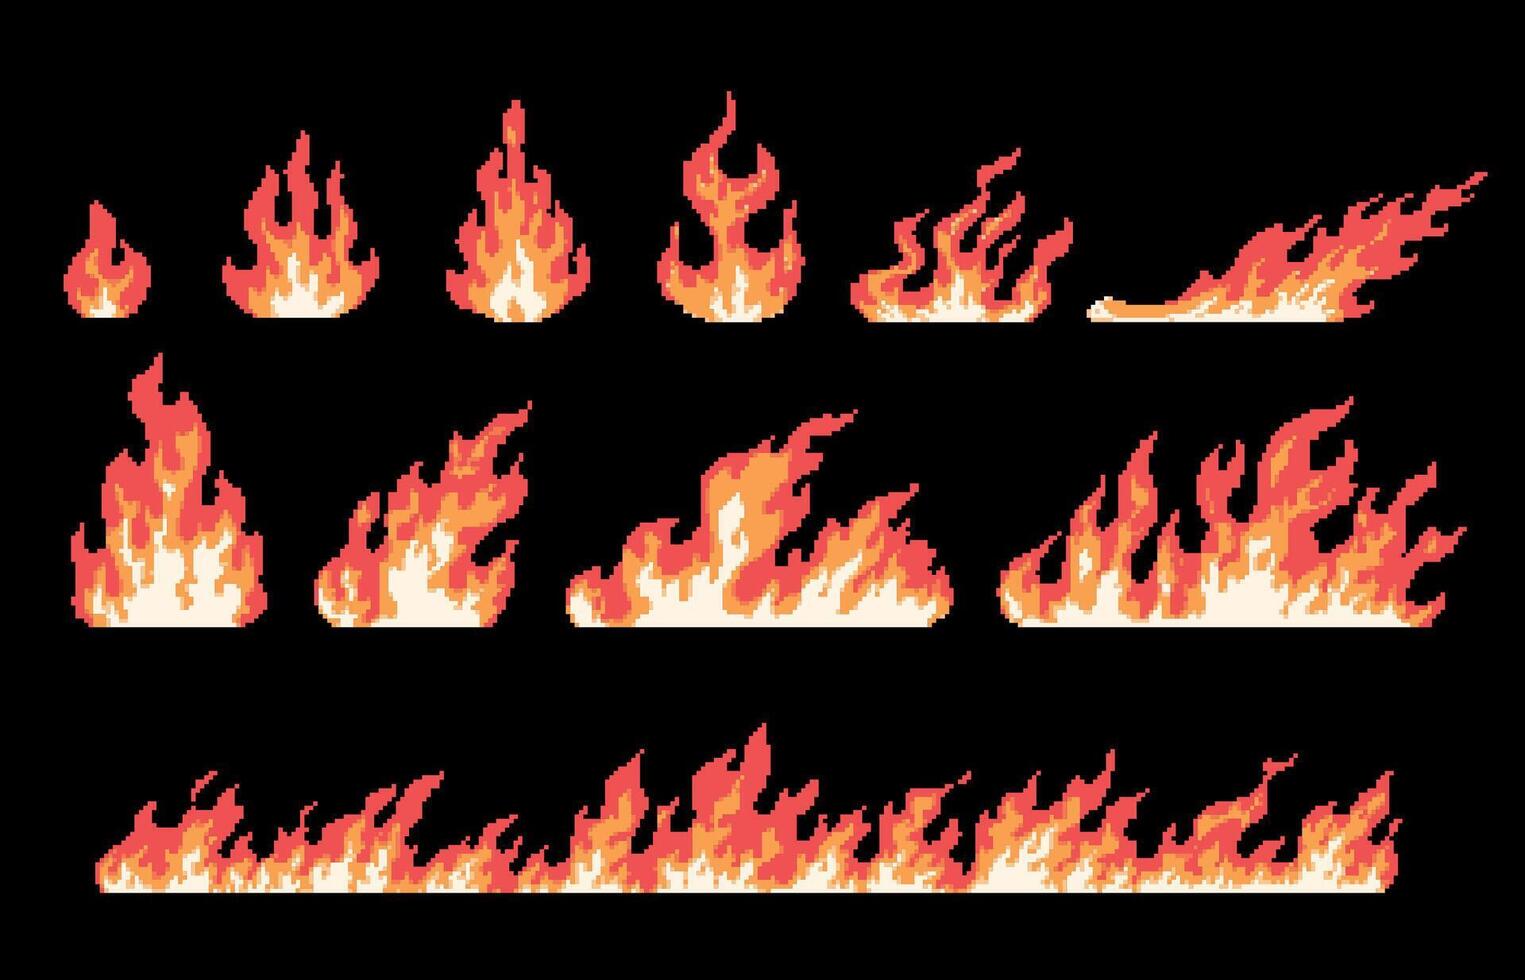 Pixel art fire and flame, burning effect for 8 bit games. Background bonfire border. Retro arcade game fire energy attack icons vector set